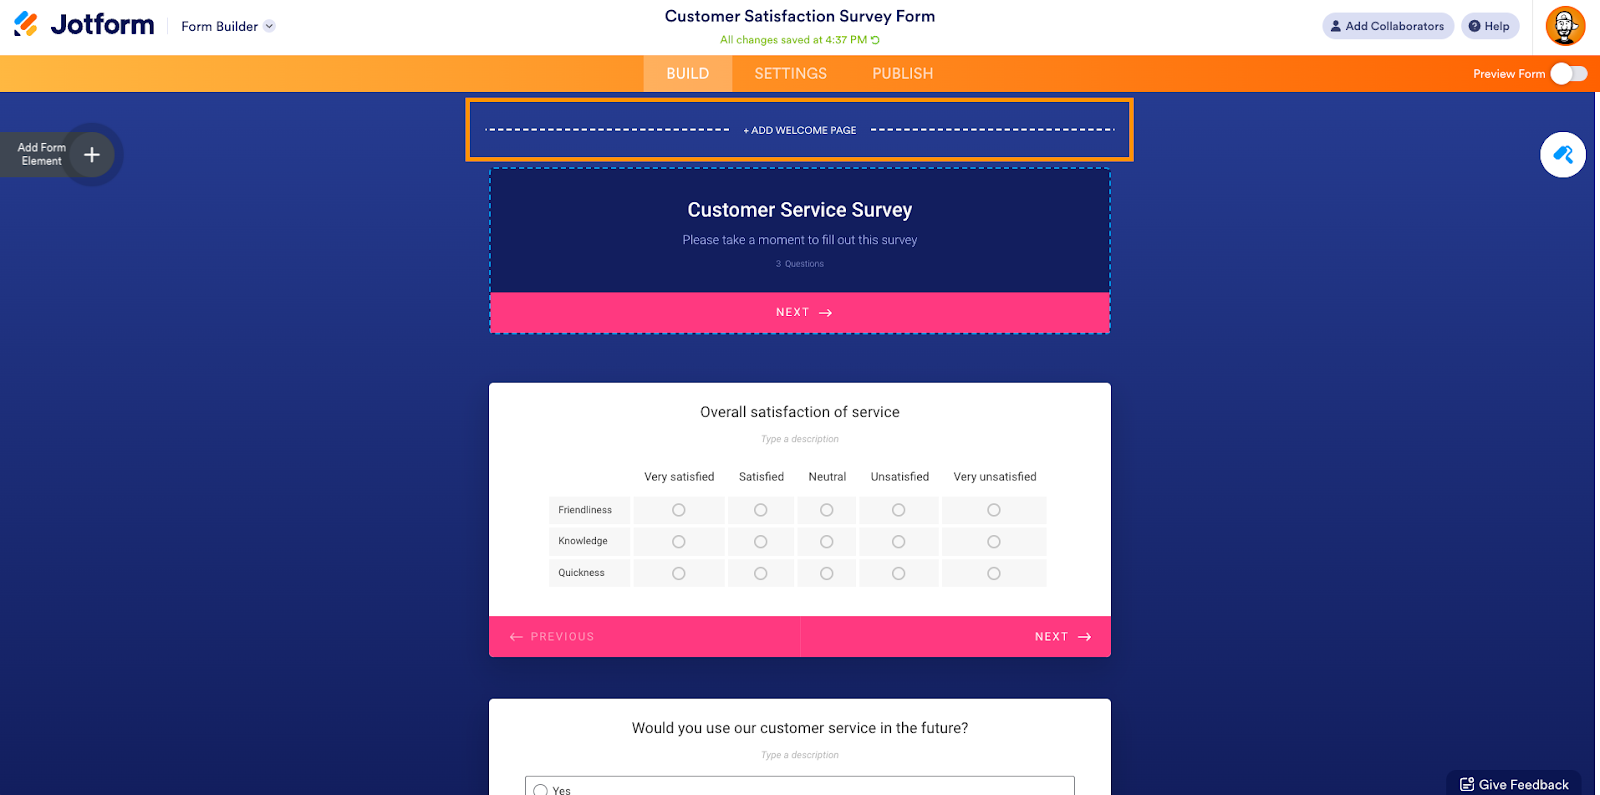 A screenshot showing the Jotform interface for editing a Customer Service Survey form